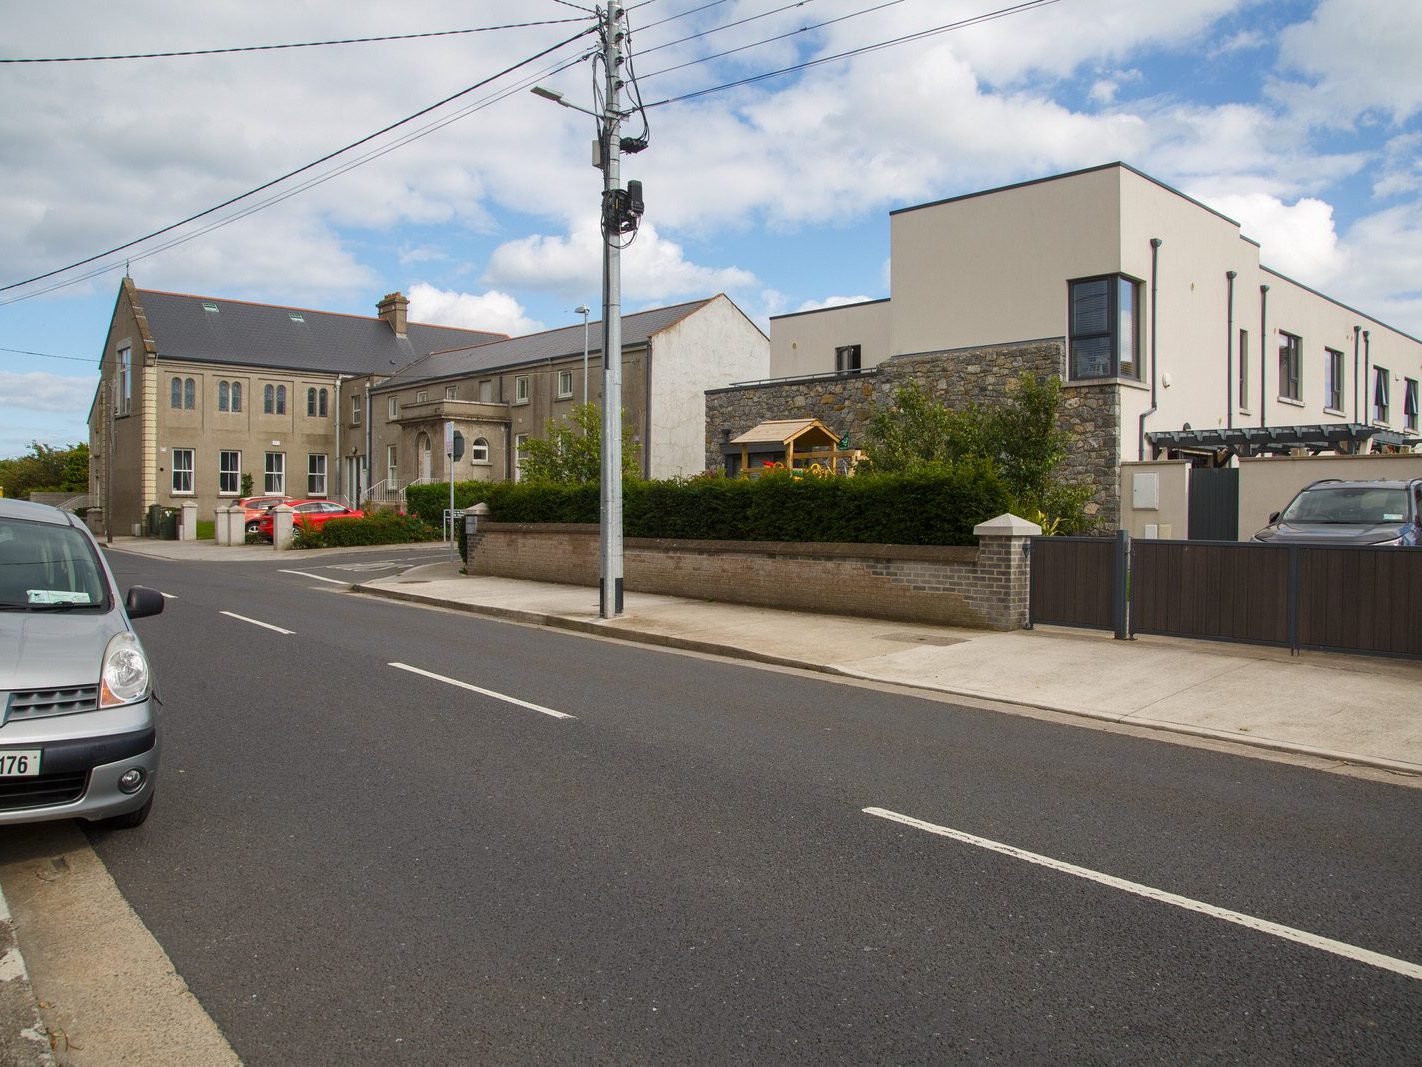 DUBLIN STREET IN BALDOYLE [HOME TO ST MARY'S SCHOOL AND ST PATRICK'S CARE CENTRE] 014